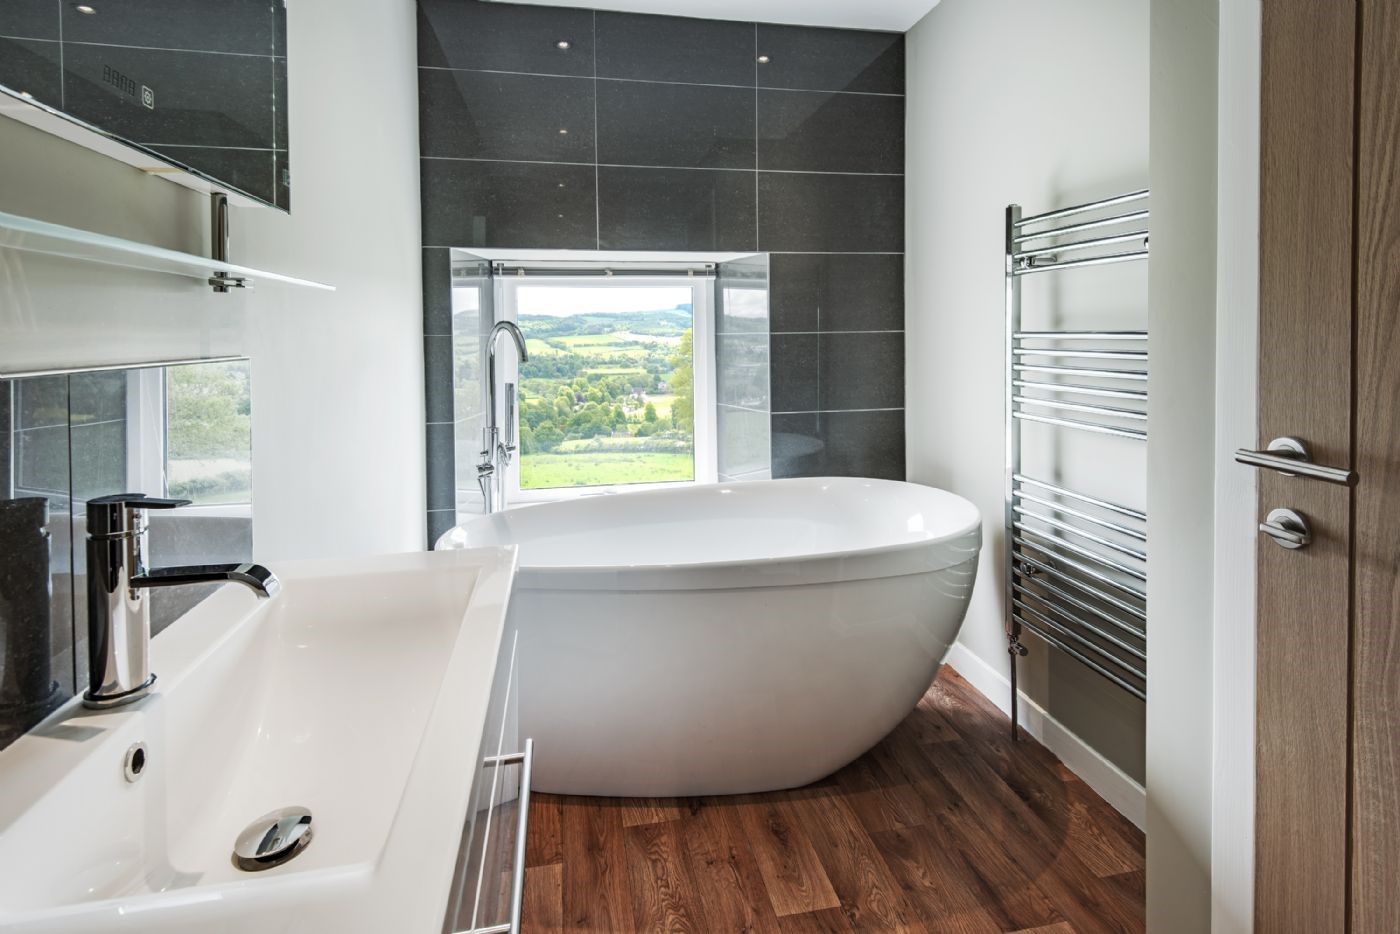 Granary - bedroom one en suite bathroom with feature bath and a view